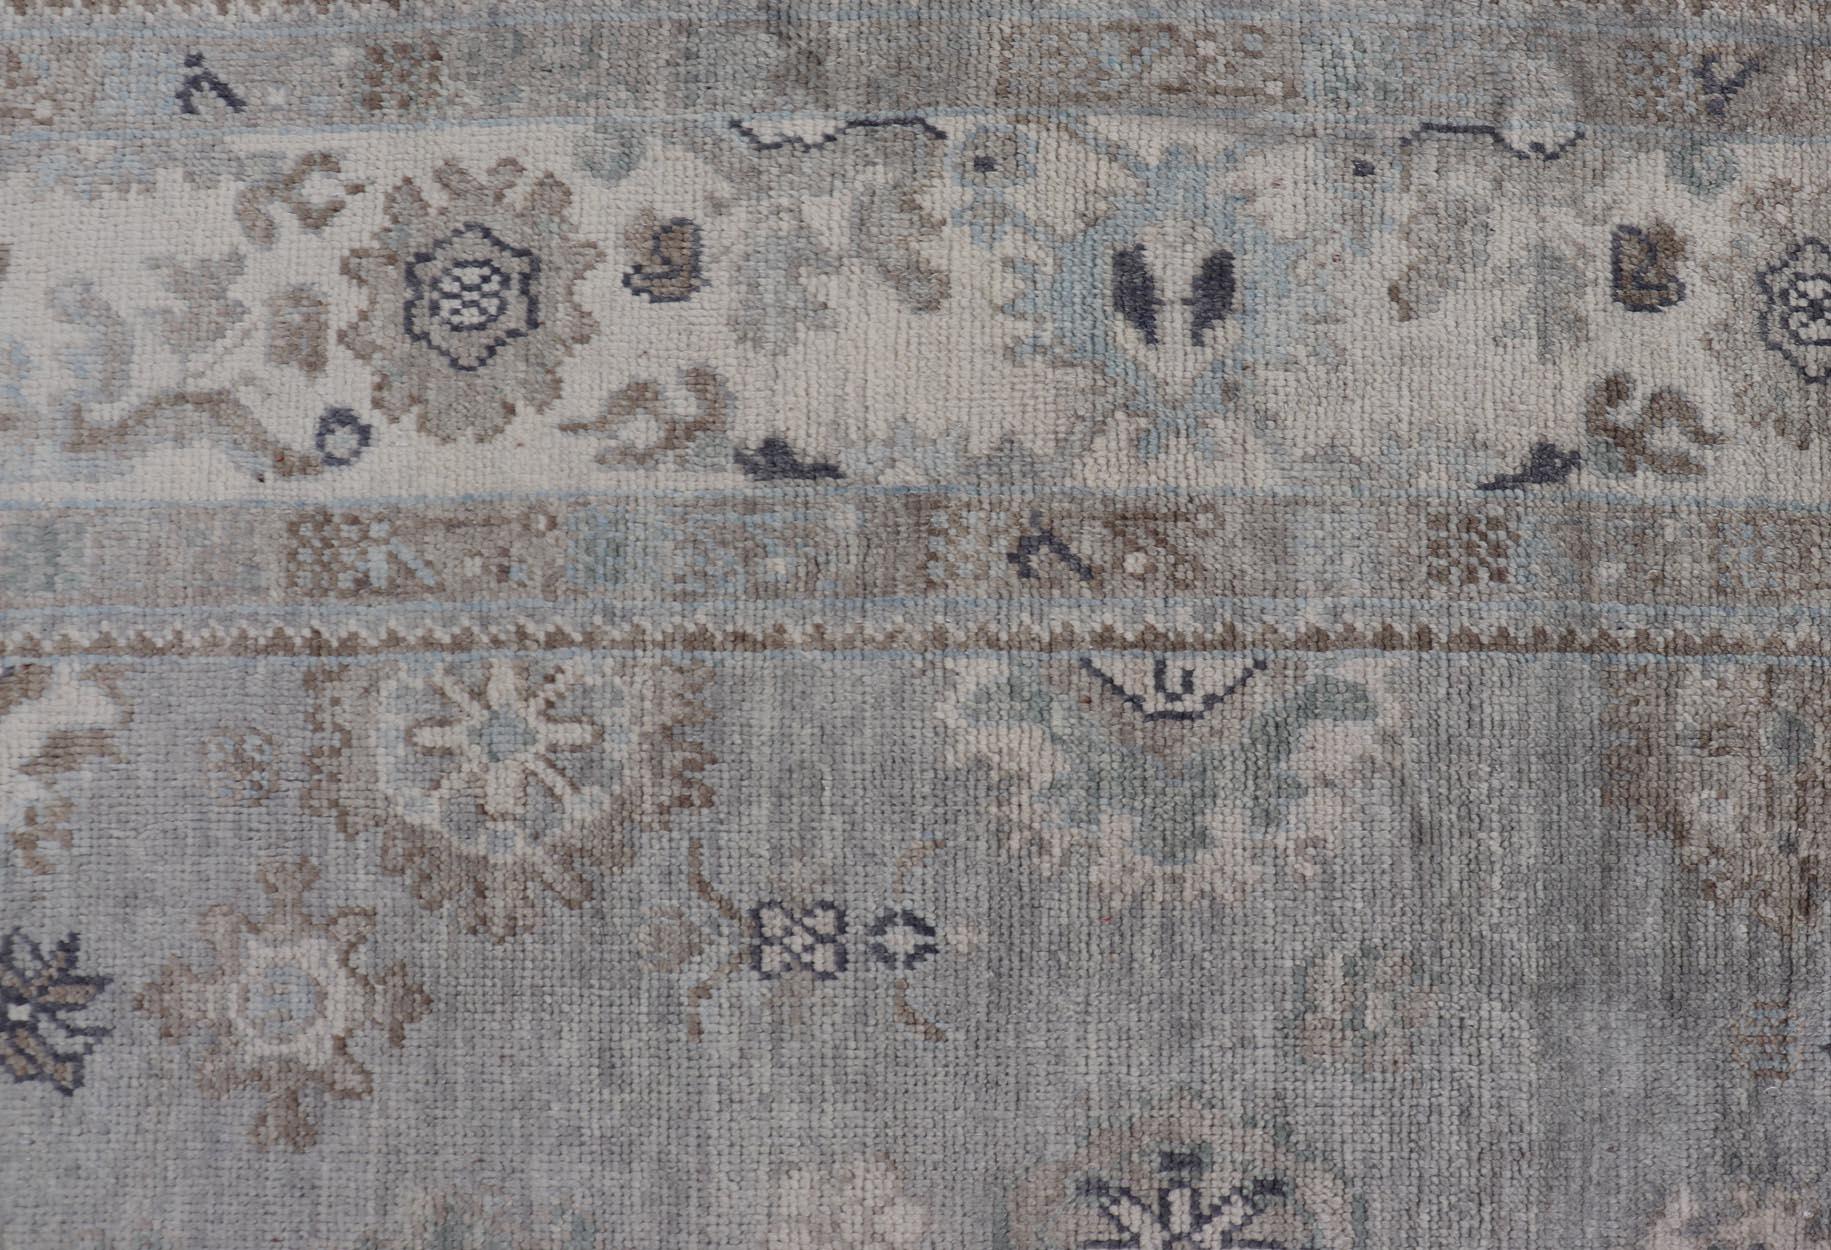 Measures: 9'2 x 12'0 
Neutral Color Palette All-Over Floral Design Turkish Oushak Rug. Keivan Woven Arts / rug EN-15249, country of origin / type: Turkey / Oushak

This traditional Oushak rug from Turkey features a subdued, neutral color palette and